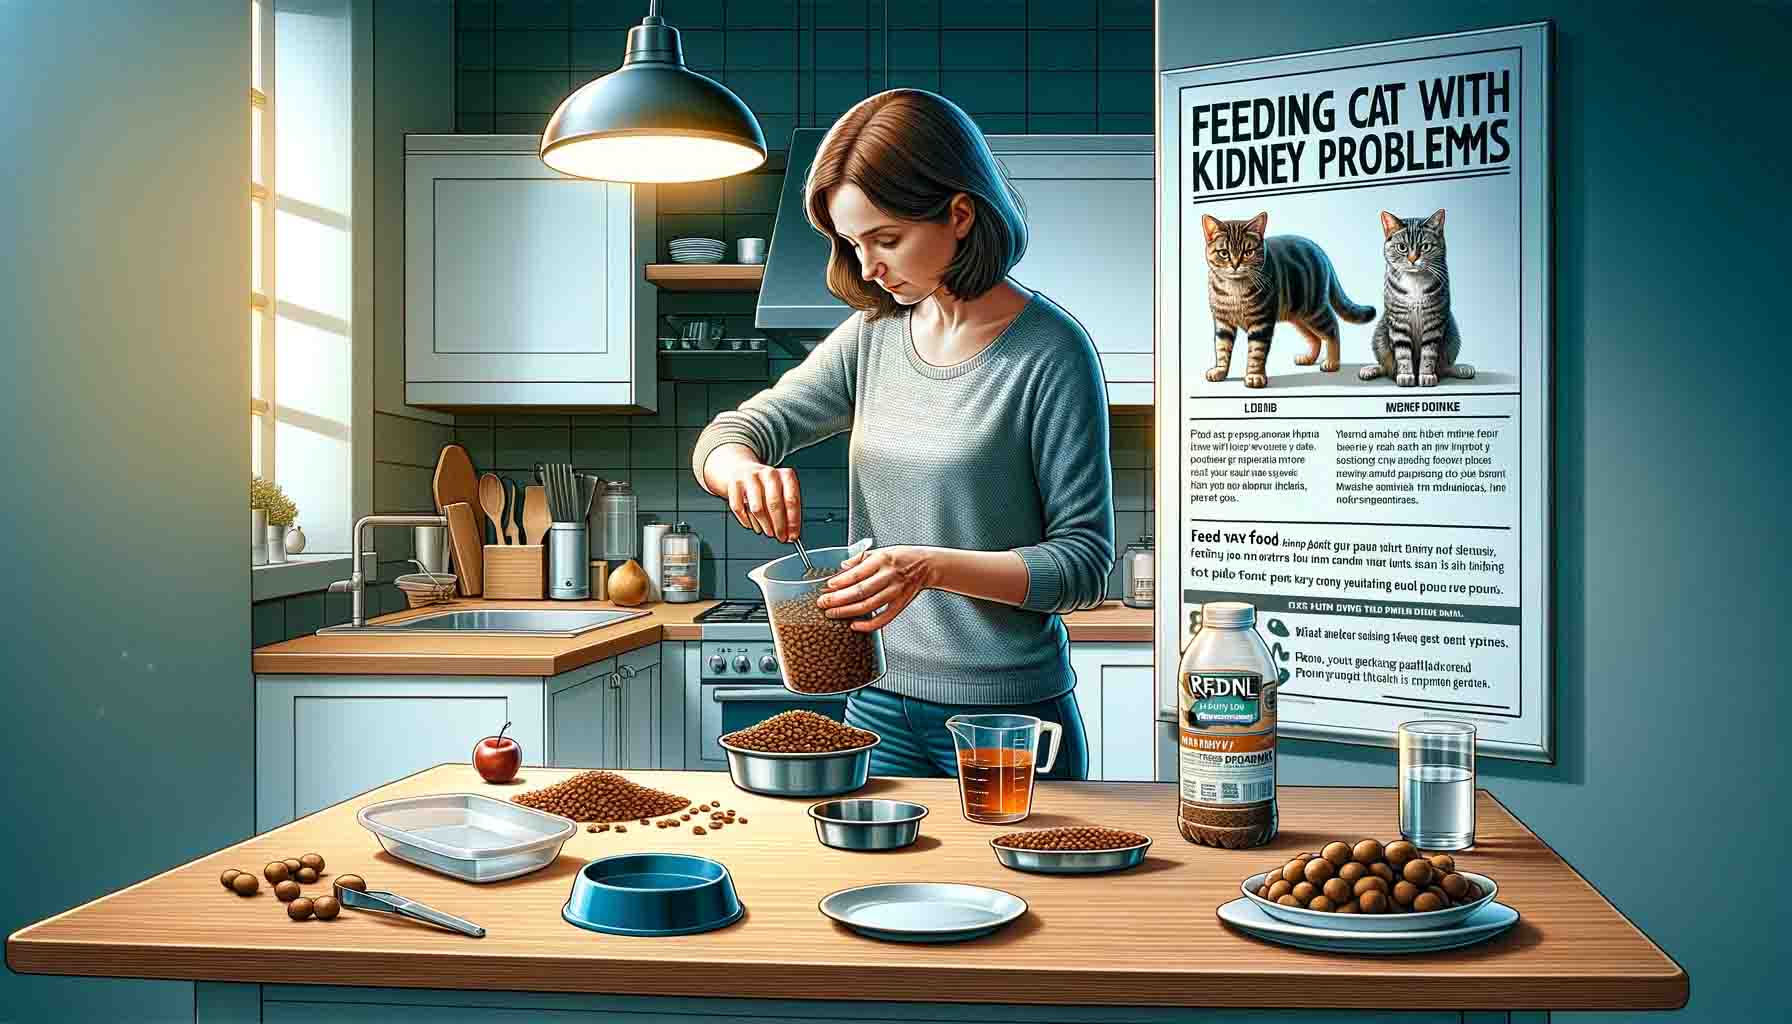 How to Feed a Cat with Kidney Problems